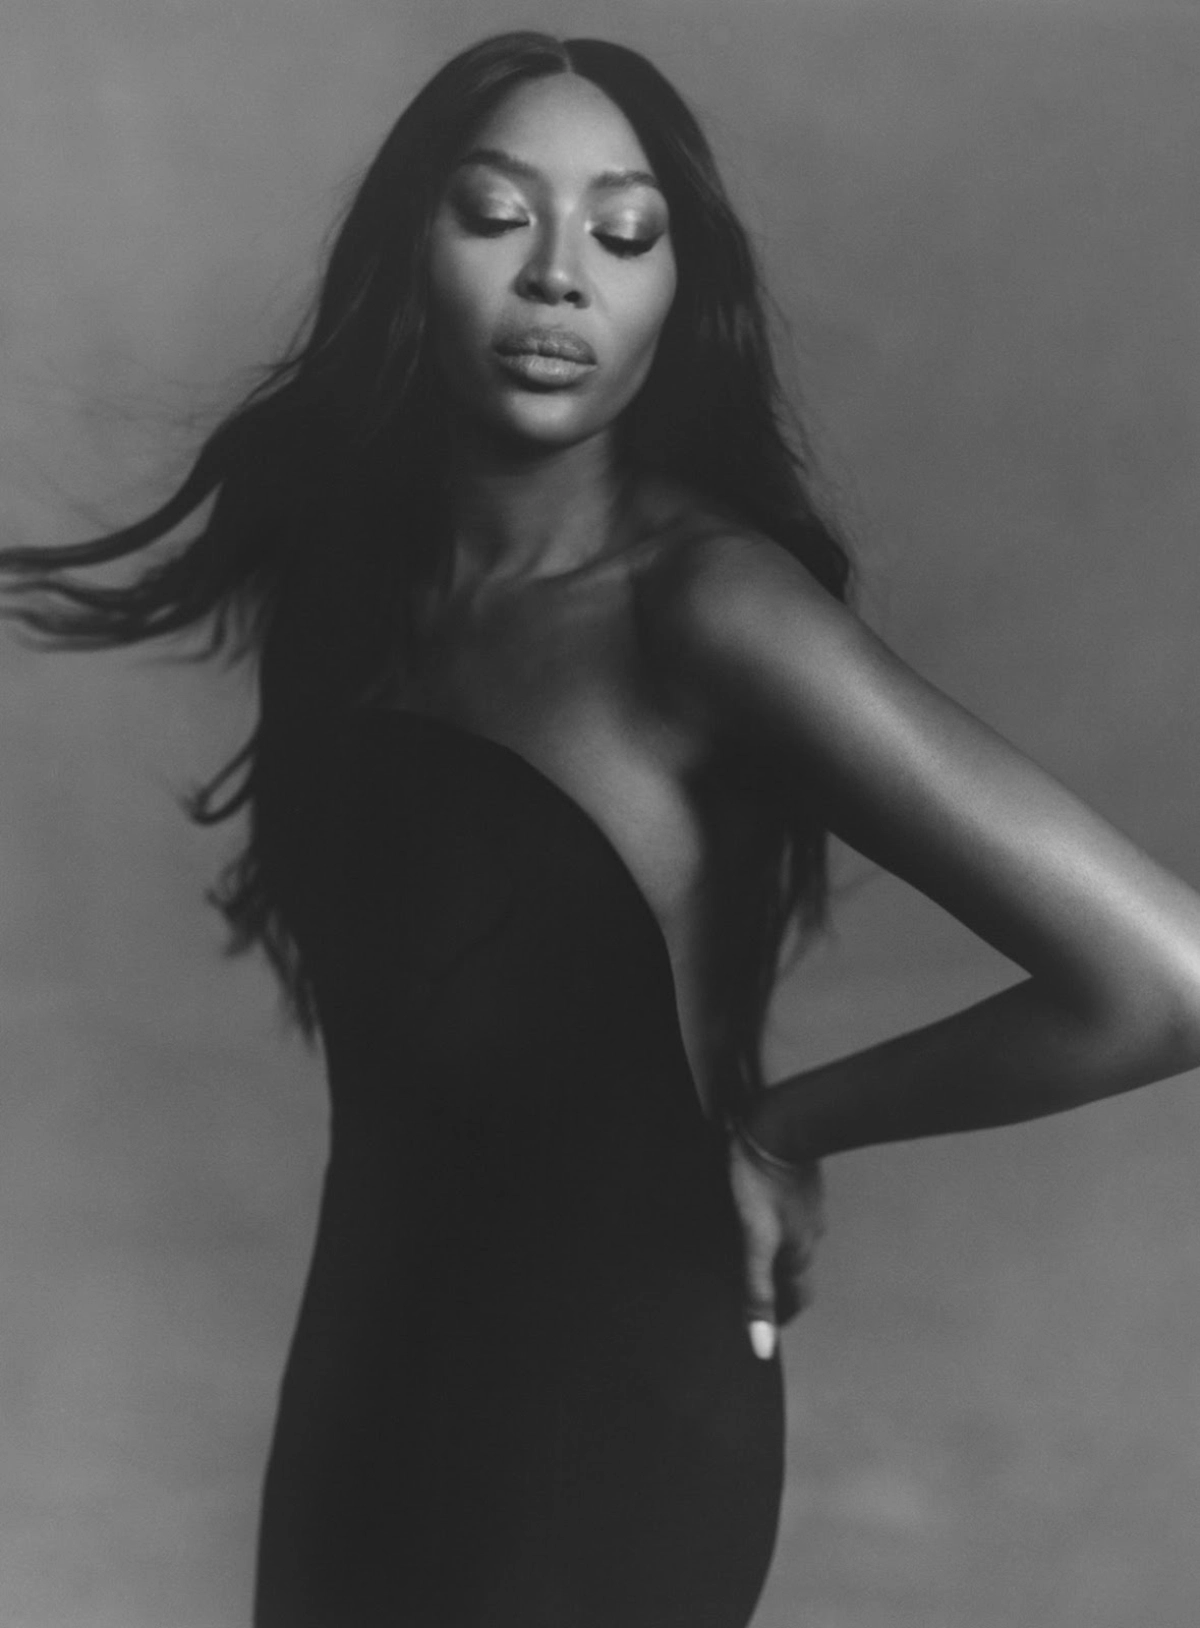 Naomi Campbell covers Vogue Germany July/August 2022 by Dan Martensen